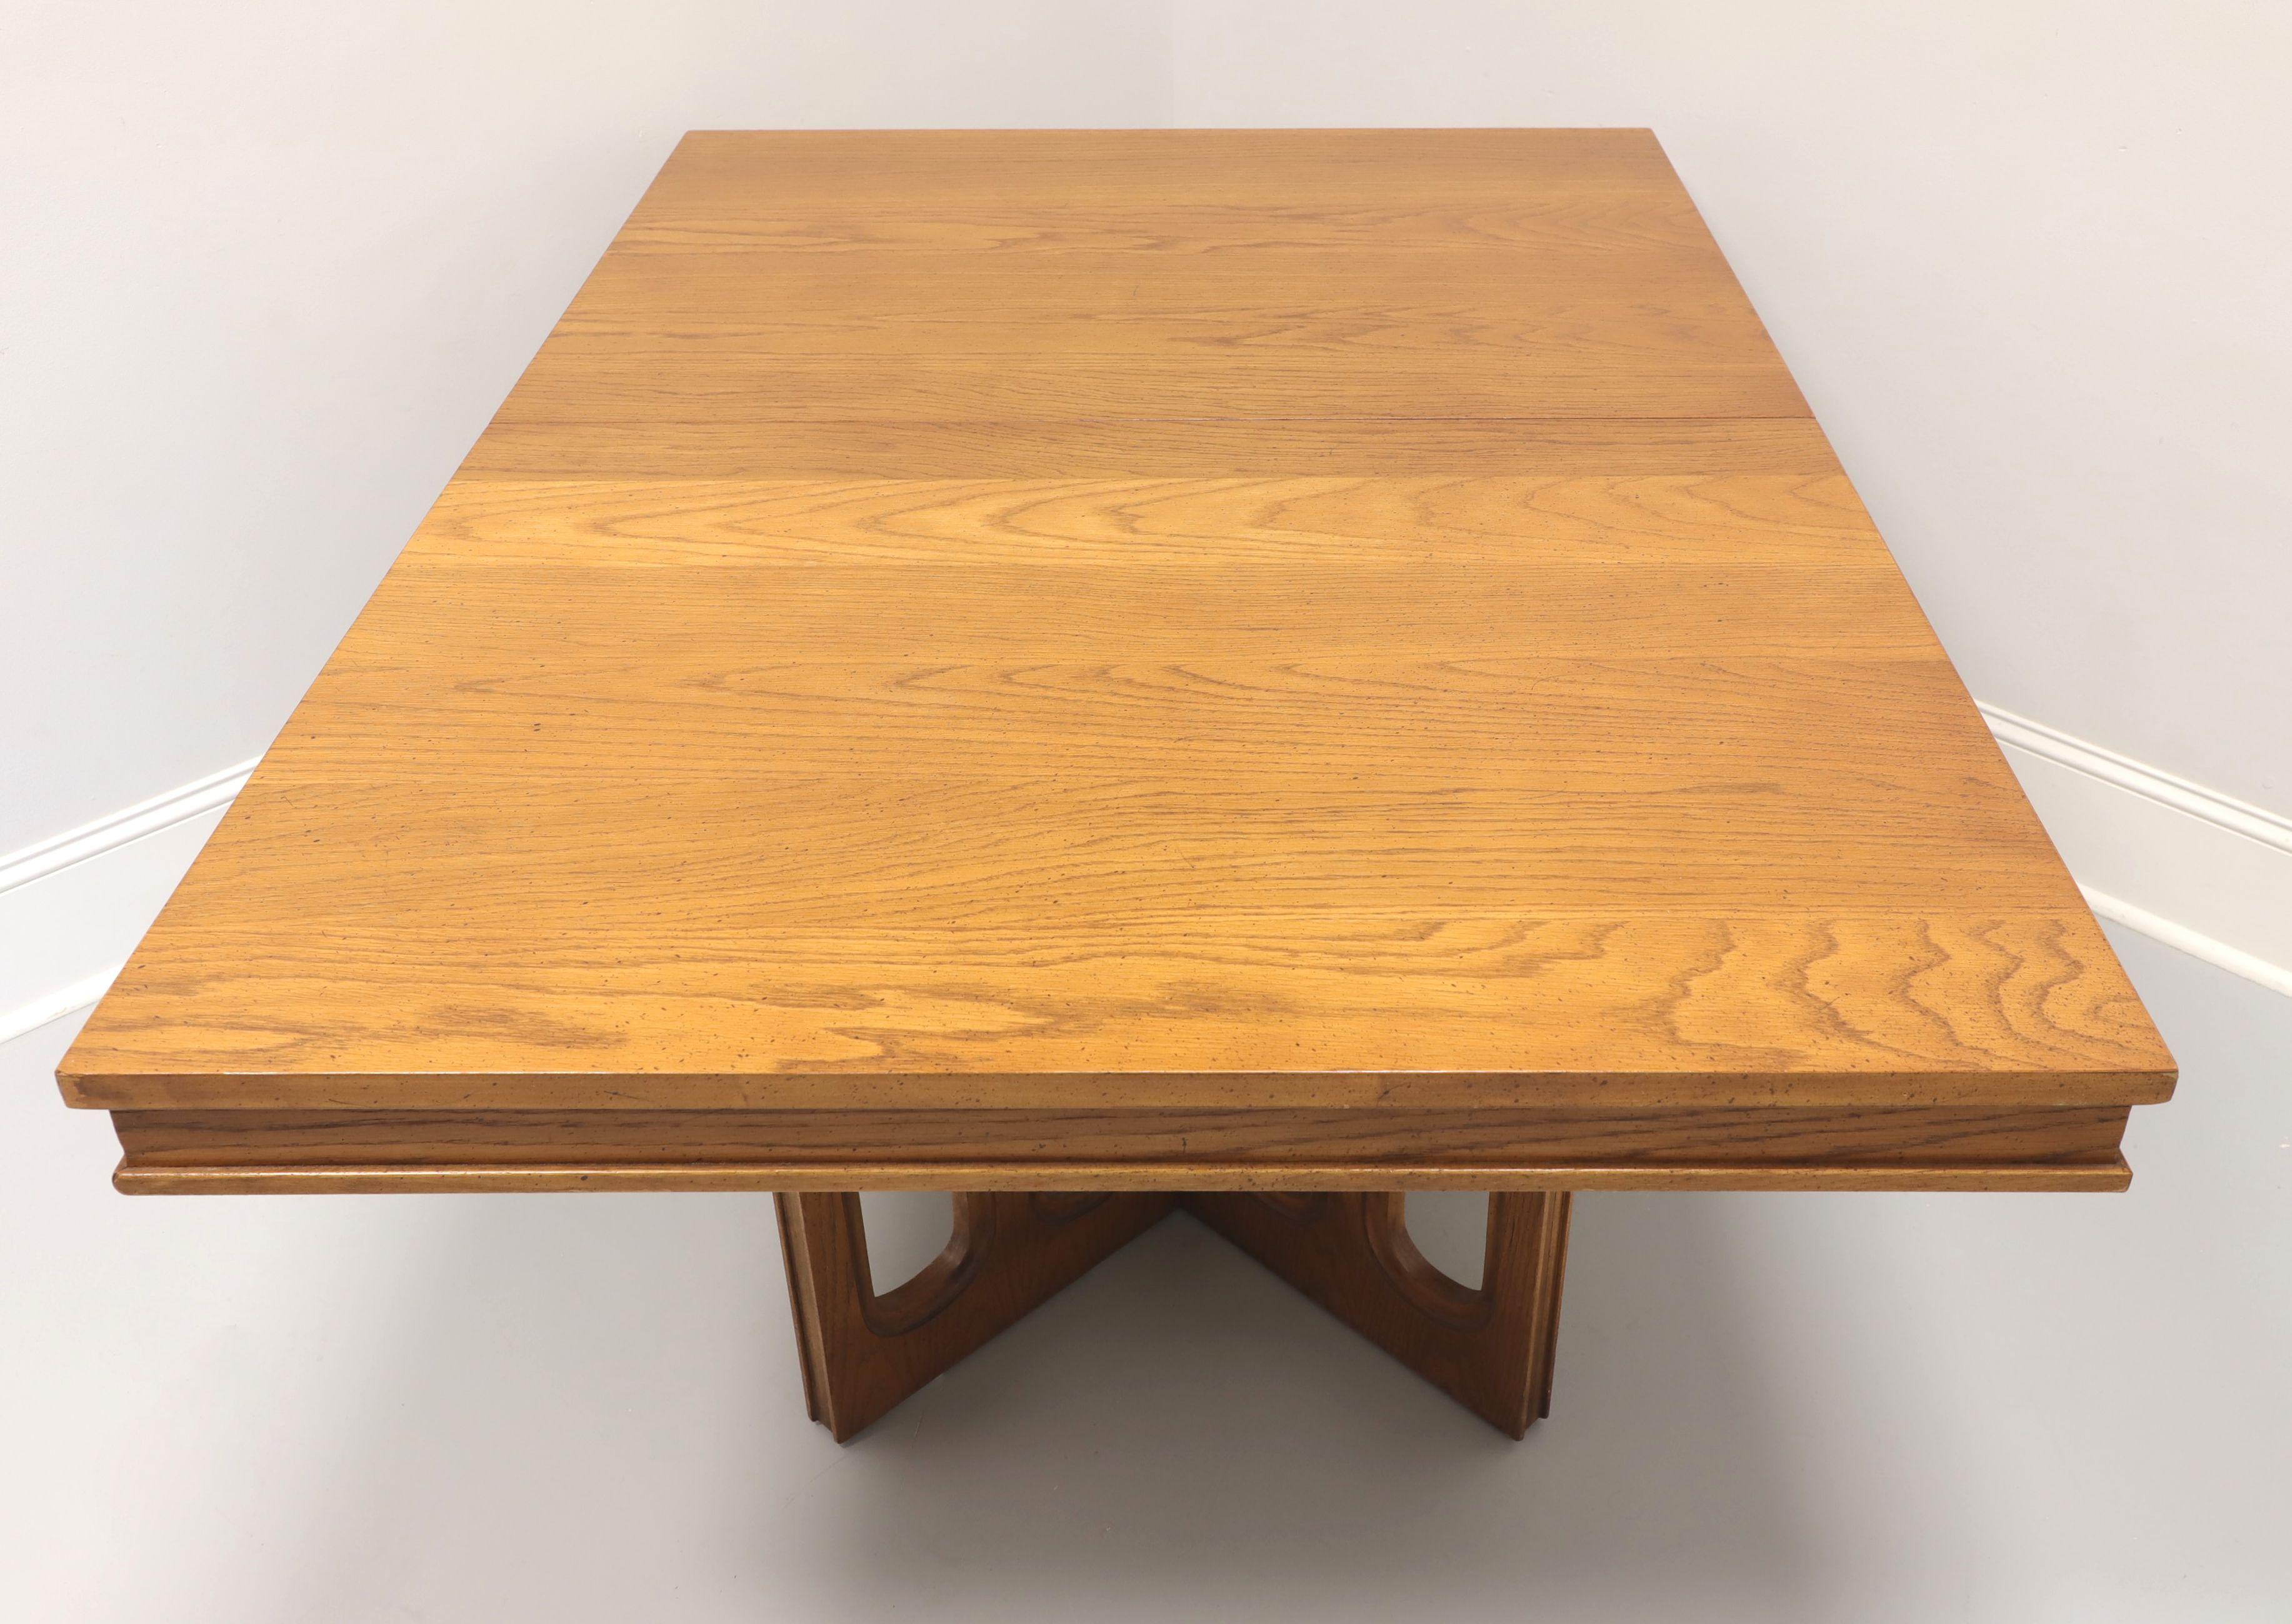 A Mid 20th Century Brutalist style rectangular dining table by Broyhill Premier. Oak with a smooth plank style top, bevel lip to apron & leaf, and dual 